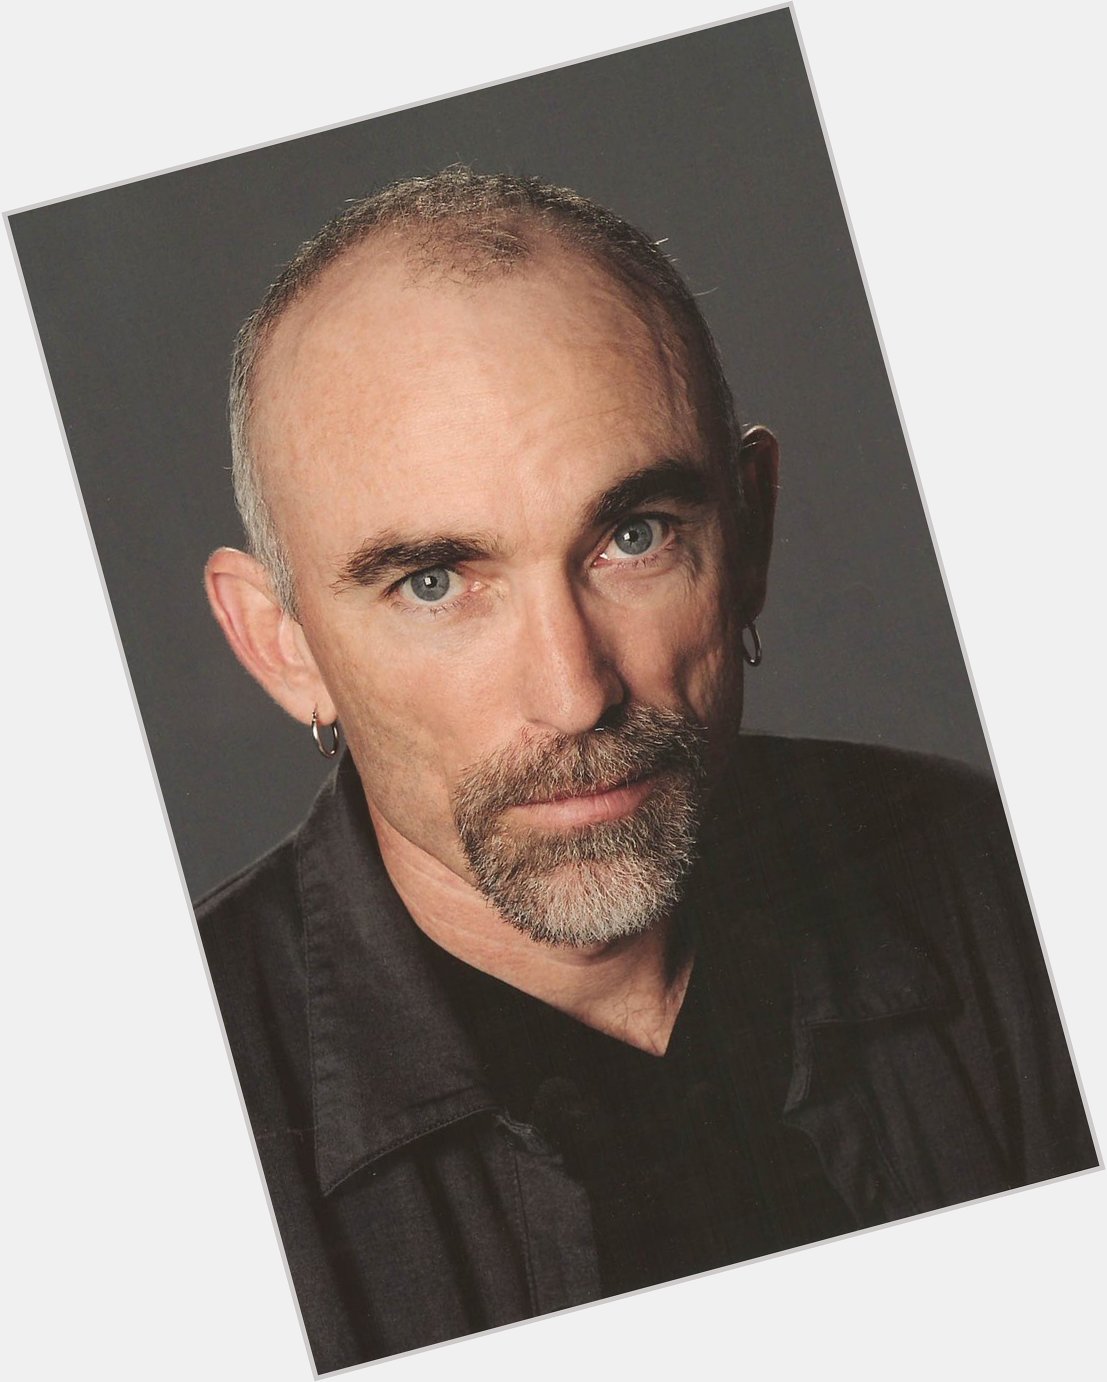 Happy Birthday Jackie Earle Haley(Hollywood Actor) 14 July 1961
age 58 years 